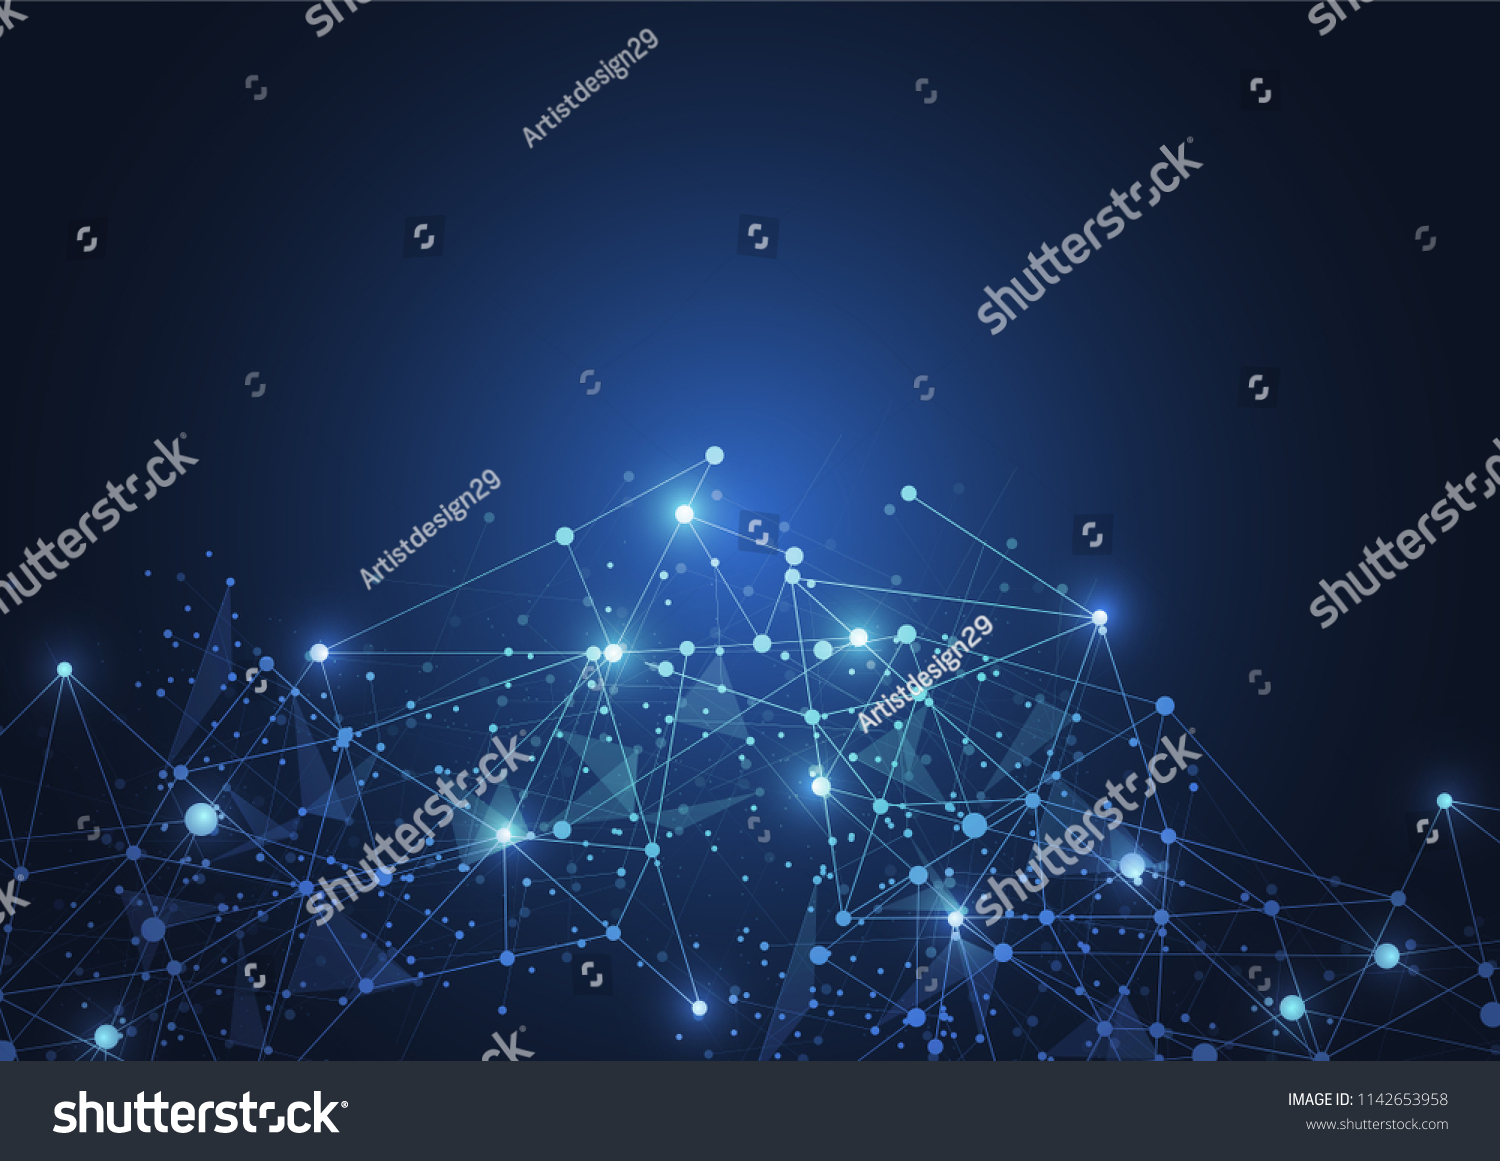 Internet connection, abstract sense of science and technology graphic design. #1142653958